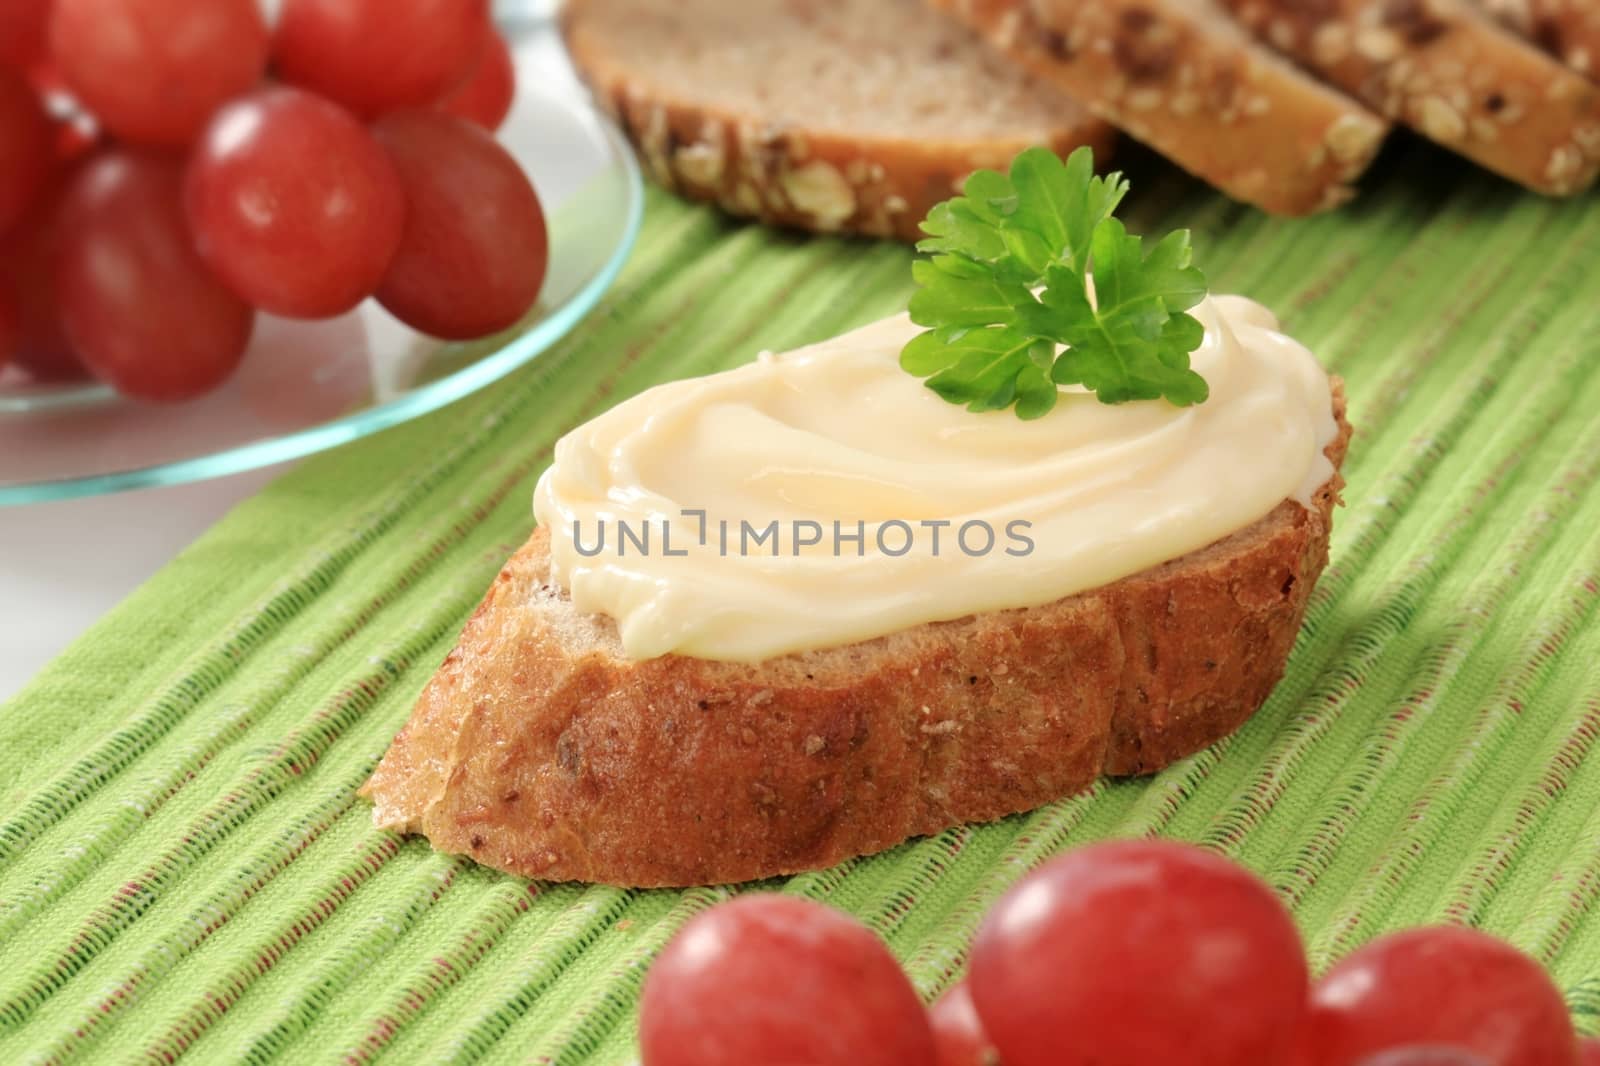 Slice of bread roll and creamy cheese spread